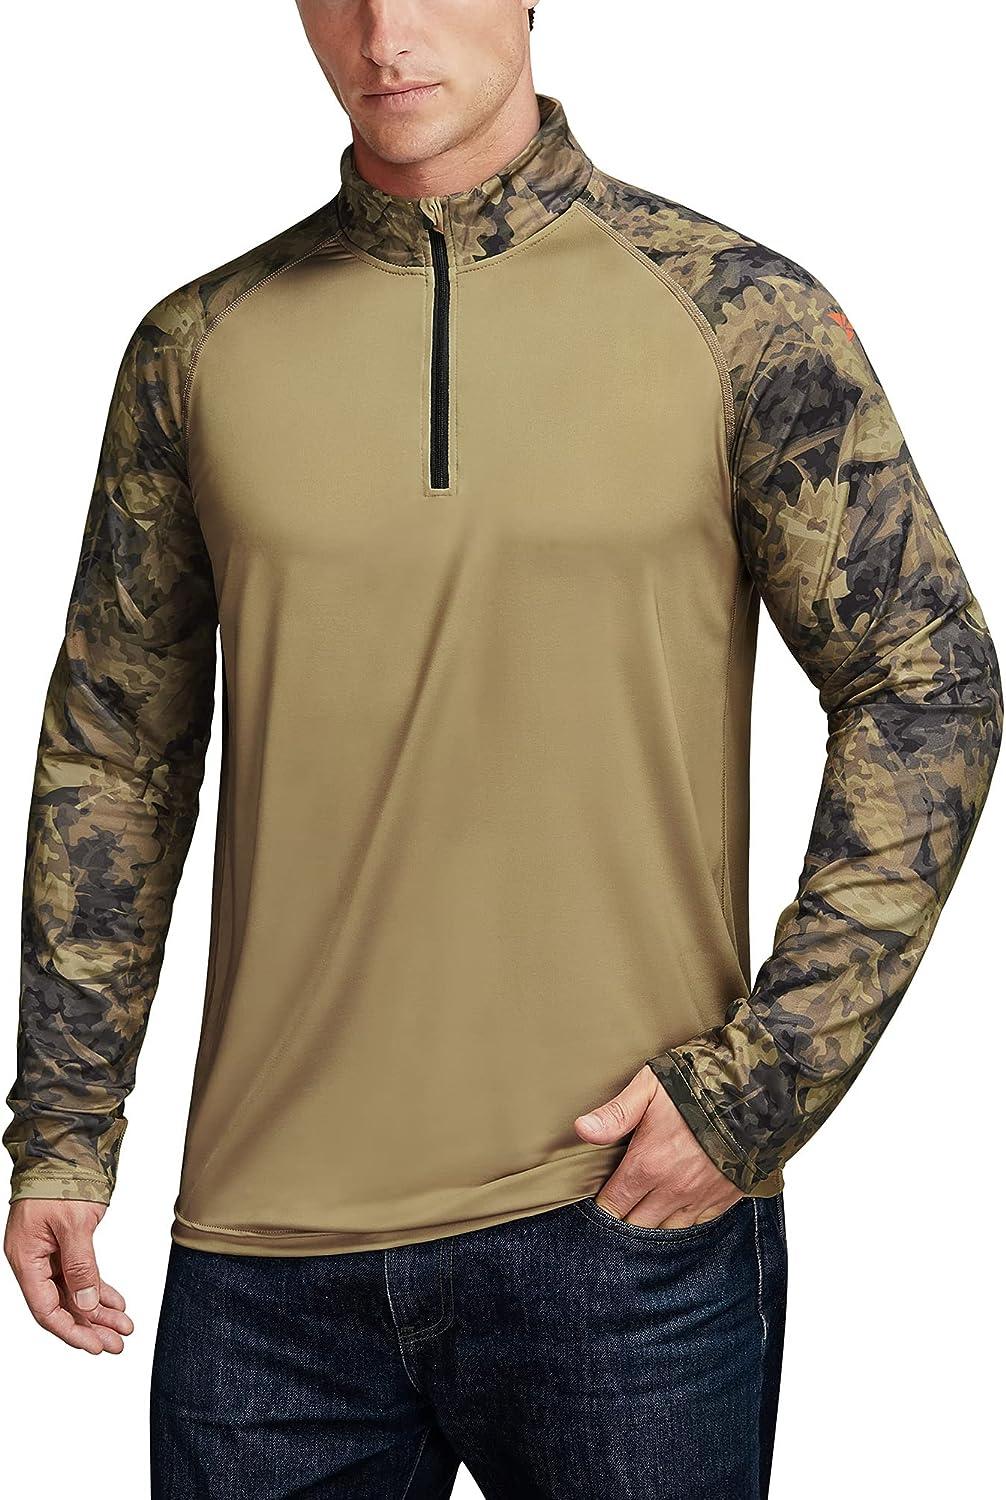 RODEEL Men's UPF 50+ Sun Protection Long Sleeve Hoodie Loose Fit Quick Dry Camo  Shirt For Fishing Running Hiking Outdoor Gym Clothes Men Spring Tops Basic  T Shirt